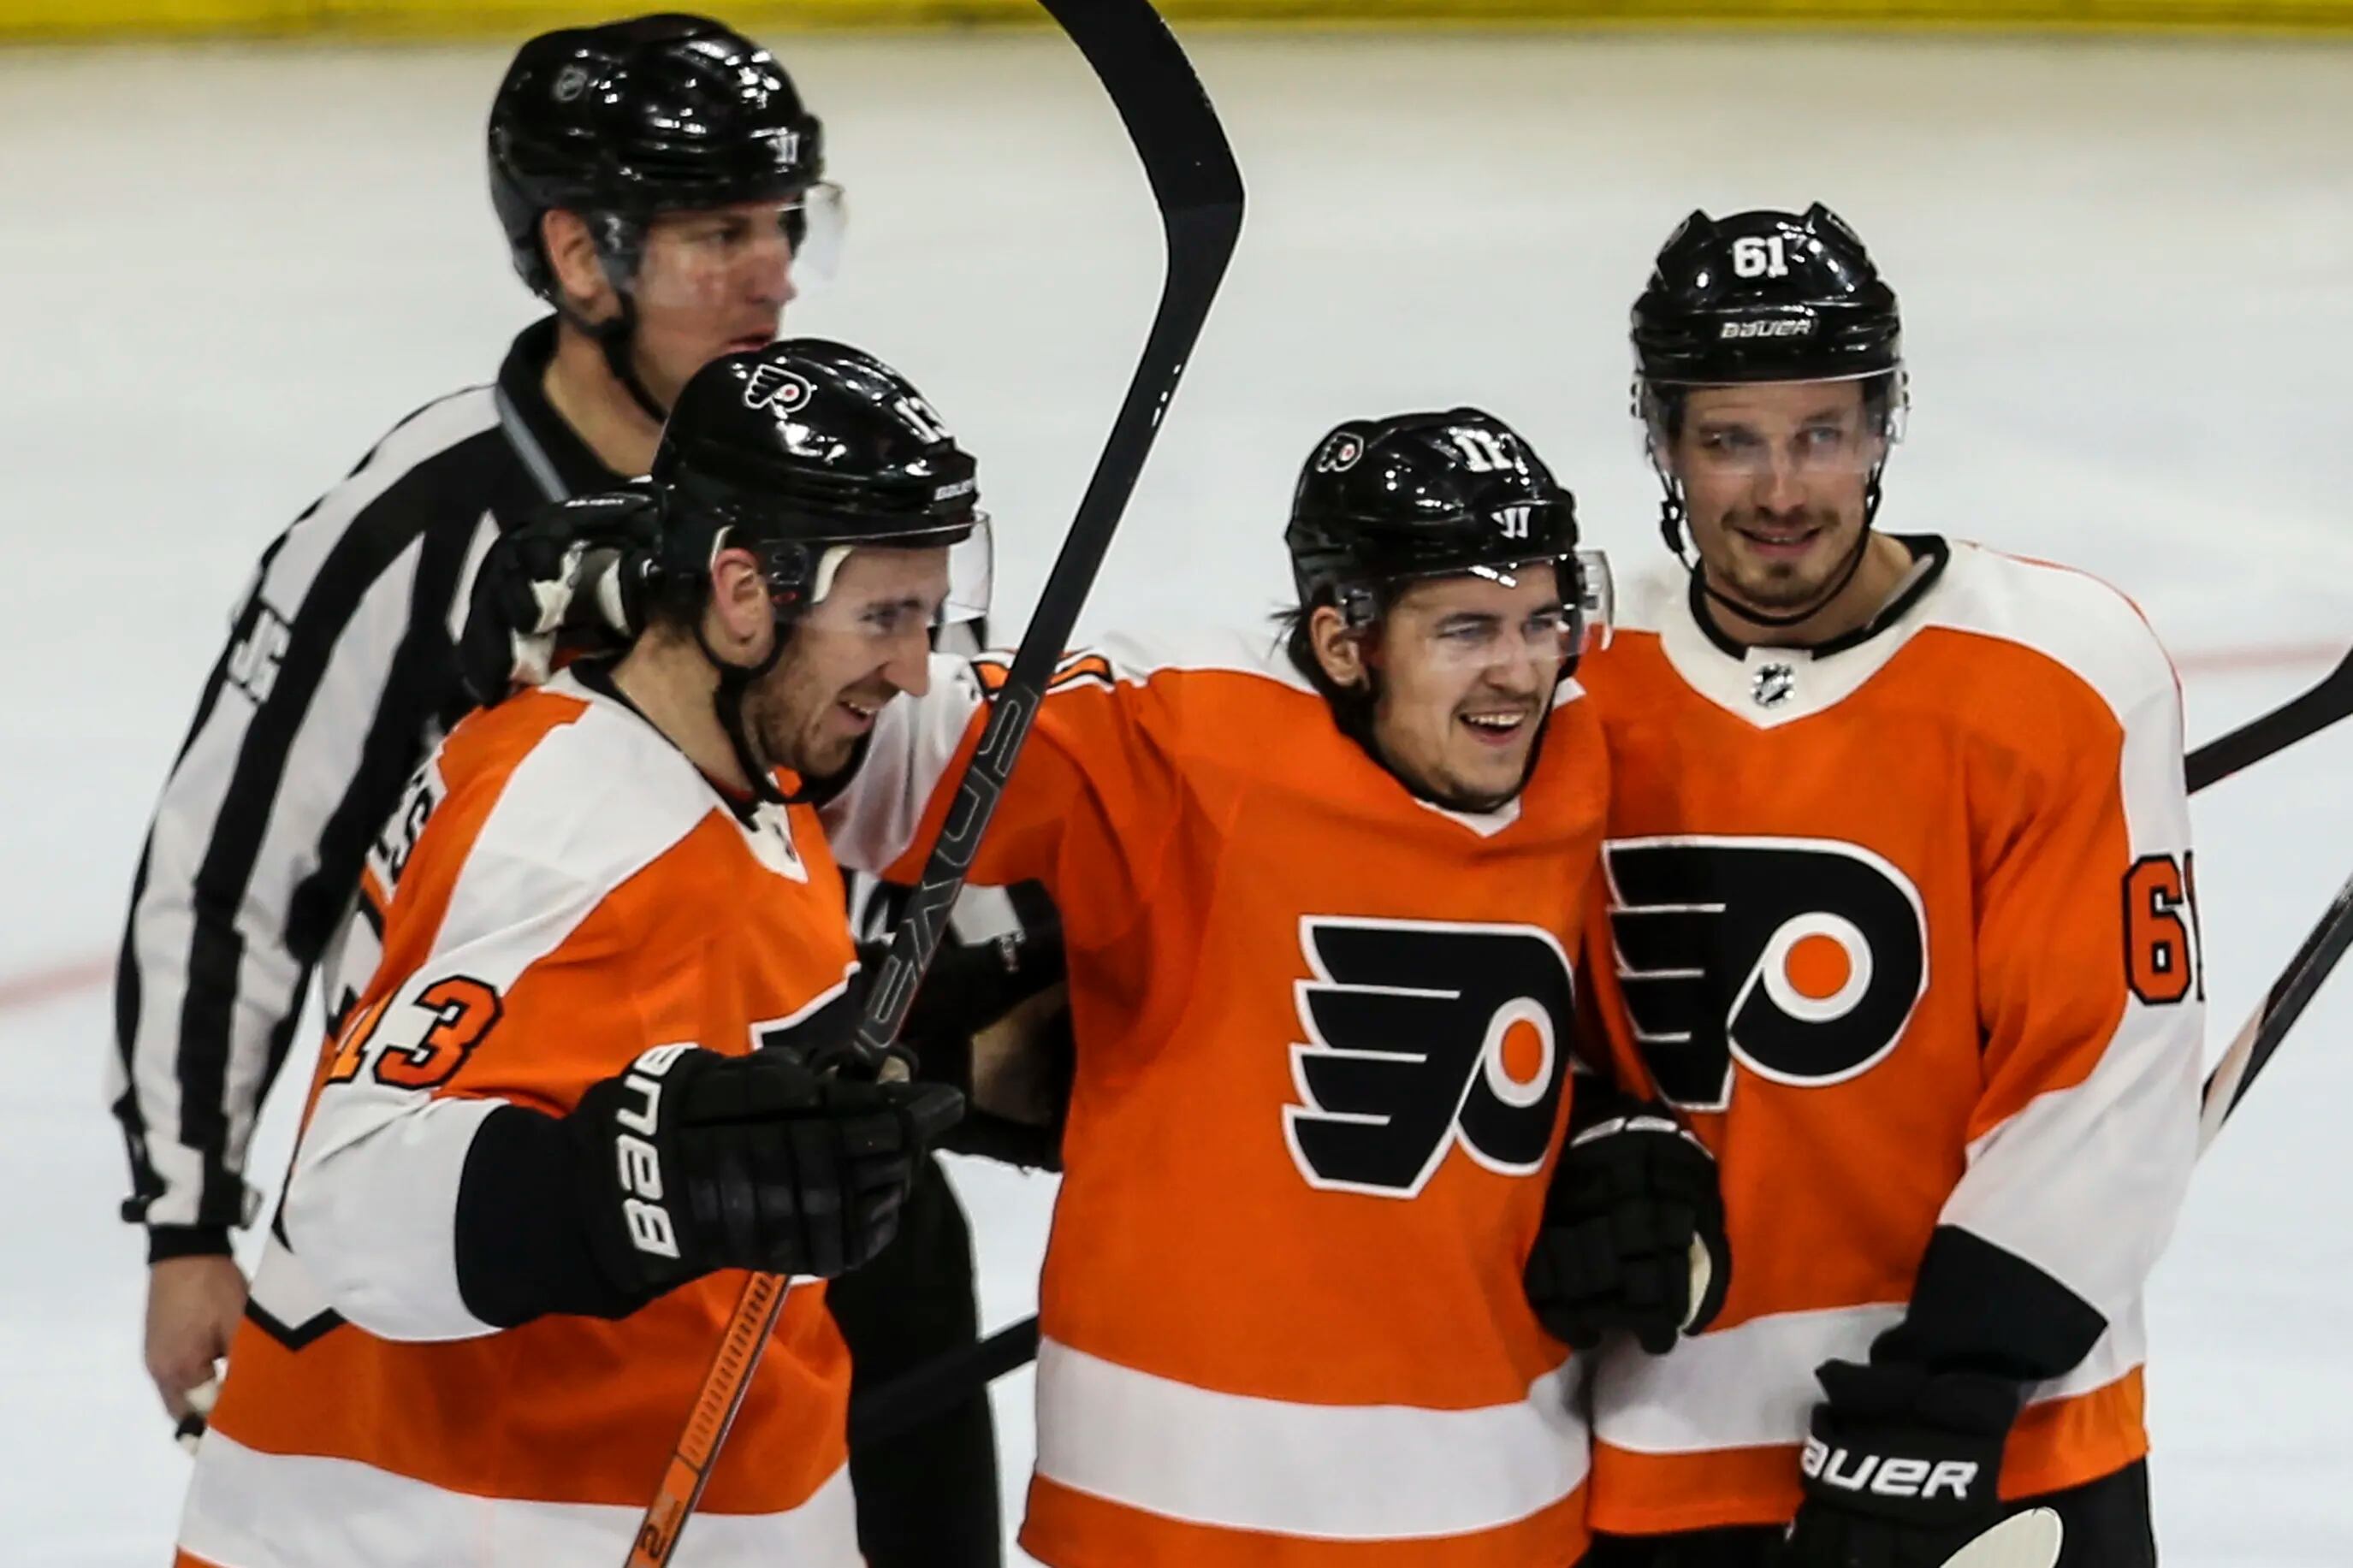 With captain dealt, Kevin Hayes embracing leadership role with Flyers